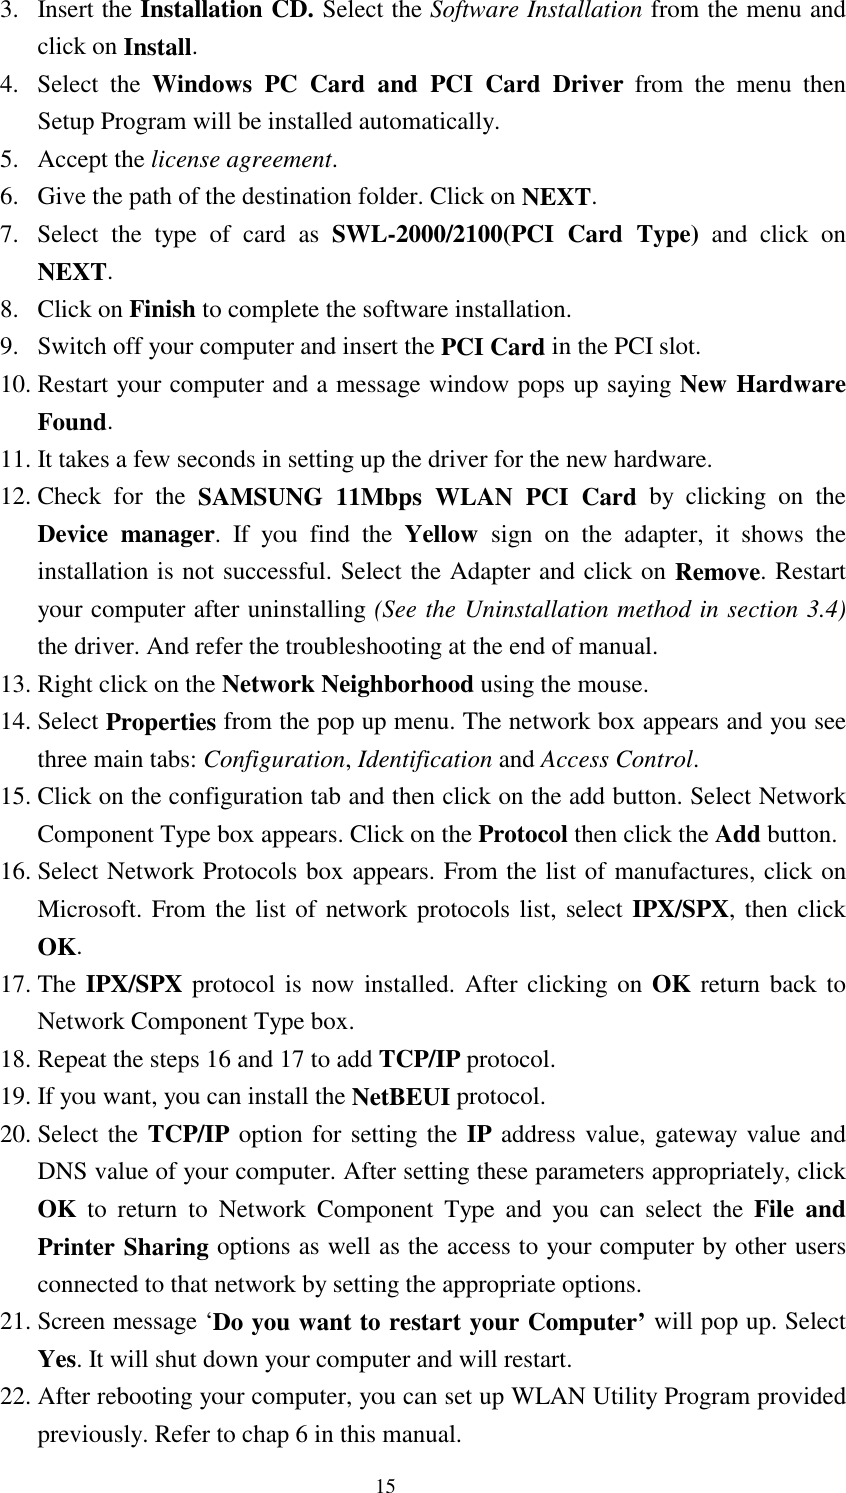  15 3. Insert the Installation CD. Select the Software Installation from the menu and click on Install. 4. Select the Windows PC Card and PCI Card Driver from the menu then   Setup Program will be installed automatically. 5. Accept the license agreement. 6.  Give the path of the destination folder. Click on NEXT. 7.  Select the type of card as SWL-2000/2100(PCI Card Type) and click on NEXT. 8. Click on Finish to complete the software installation. 9.  Switch off your computer and insert the PCI Card in the PCI slot. 10. Restart your computer and a message window pops up saying New Hardware Found. 11. It takes a few seconds in setting up the driver for the new hardware. 12. Check for the SAMSUNG 11Mbps WLAN PCI Card by clicking on the Device manager. If you find the Yellow  sign on the adapter, it shows the installation is not successful. Select the Adapter and click on Remove. Restart your computer after uninstalling (See the Uninstallation method in section 3.4) the driver. And refer the troubleshooting at the end of manual. 13. Right click on the Network Neighborhood using the mouse.  14. Select Properties from the pop up menu. The network box appears and you see three main tabs: Configuration, Identification and Access Control. 15. Click on the configuration tab and then click on the add button. Select Network      Component Type box appears. Click on the Protocol then click the Add button. 16. Select Network Protocols box appears. From the list of manufactures, click on Microsoft. From the list of network protocols list, select IPX/SPX, then click OK. 17. The IPX/SPX protocol is now installed. After clicking on OK return back to Network Component Type box. 18. Repeat the steps 16 and 17 to add TCP/IP protocol. 19. If you want, you can install the NetBEUI protocol.  20. Select the  TCP/IP option for setting the IP address value, gateway value and DNS value of your computer. After setting these parameters appropriately, click OK to return to Network Component Type and you can select the File and Printer Sharing options as well as the access to your computer by other users connected to that network by setting the appropriate options. 21. Screen message ‘Do you want to restart your Computer’ will pop up. Select Yes. It will shut down your computer and will restart. 22. After rebooting your computer, you can set up WLAN Utility Program provided previously. Refer to chap 6 in this manual. 